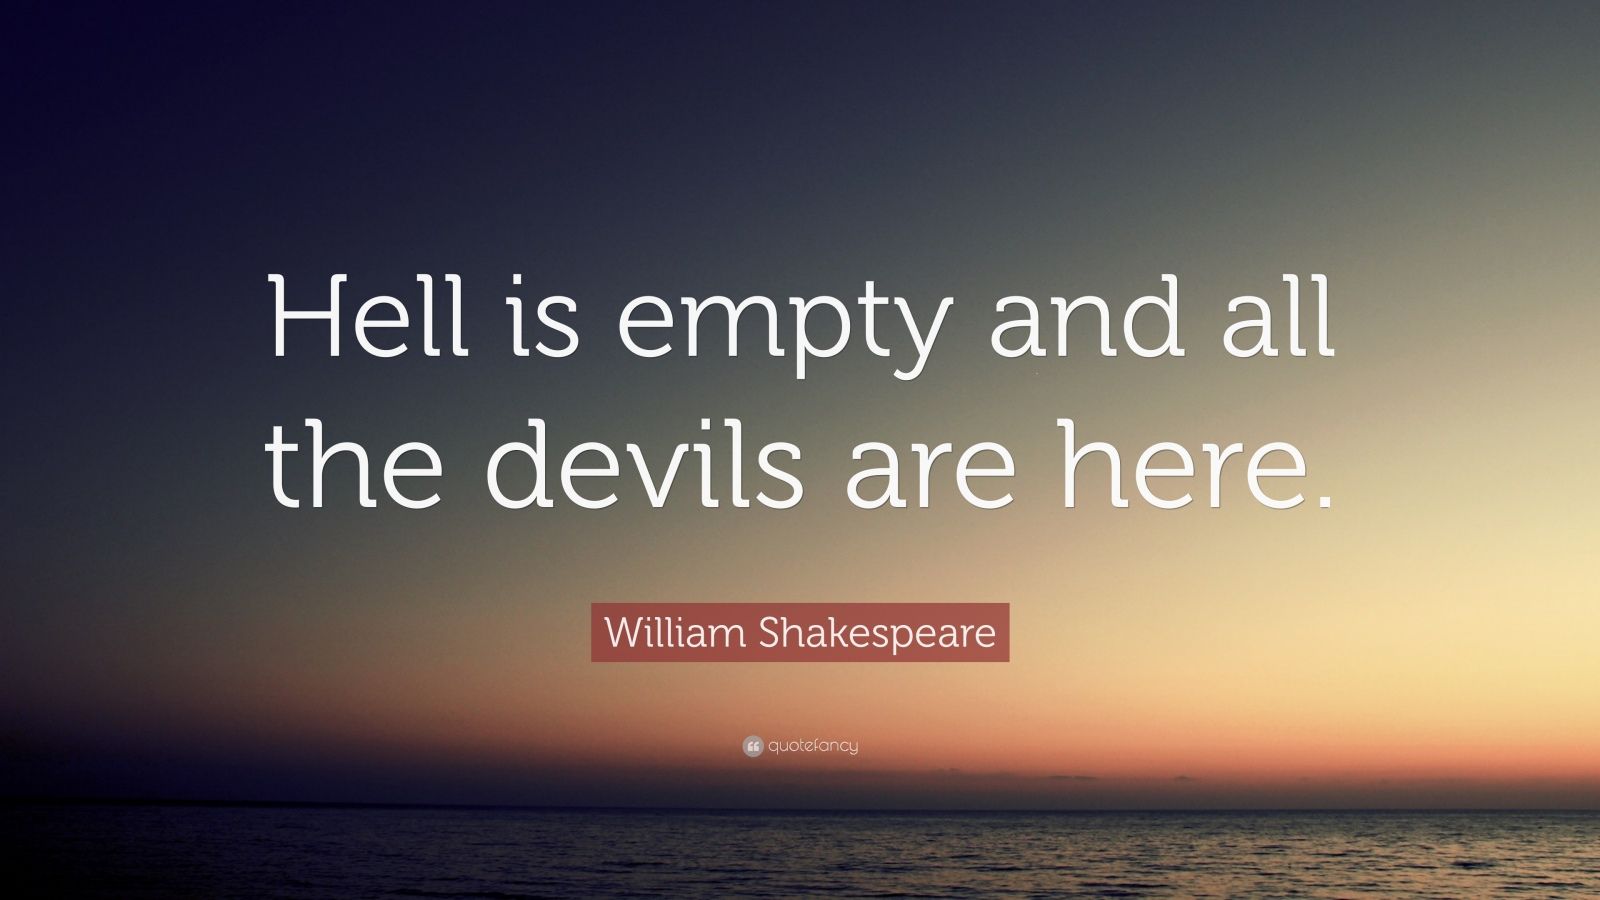 William Shakespeare Quote: “Hell is empty and all the devils are here ...